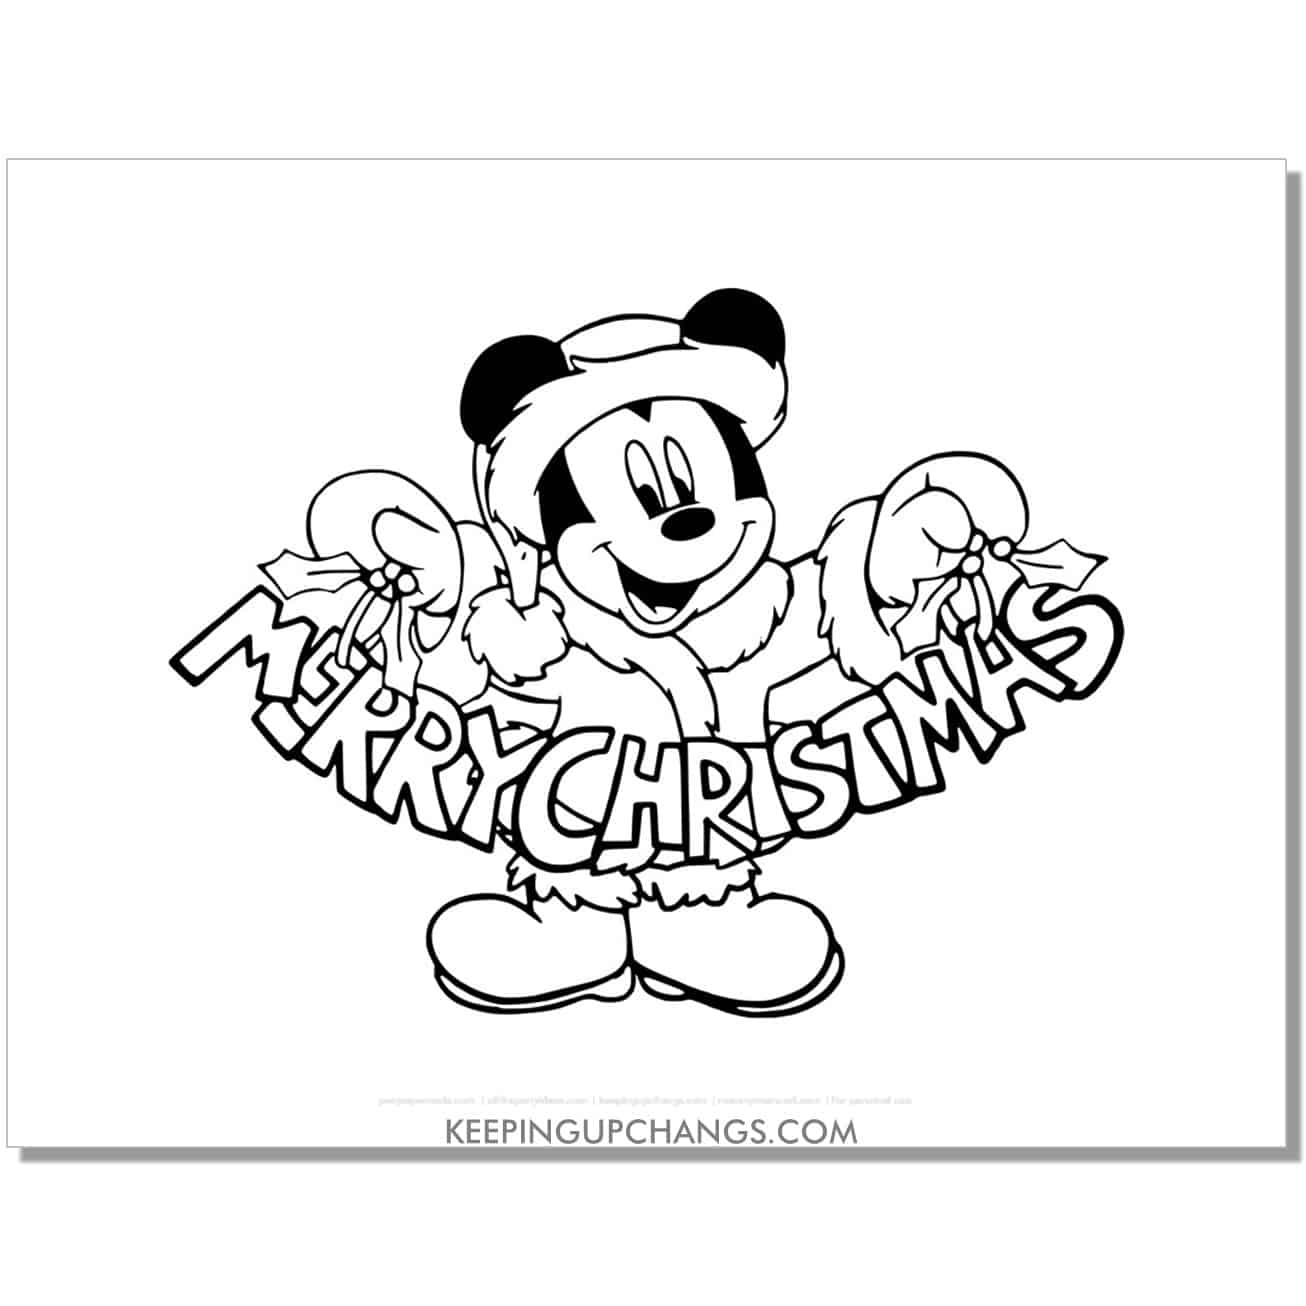 free mickey mouse holding merry christmas banner coloring page, sheet.